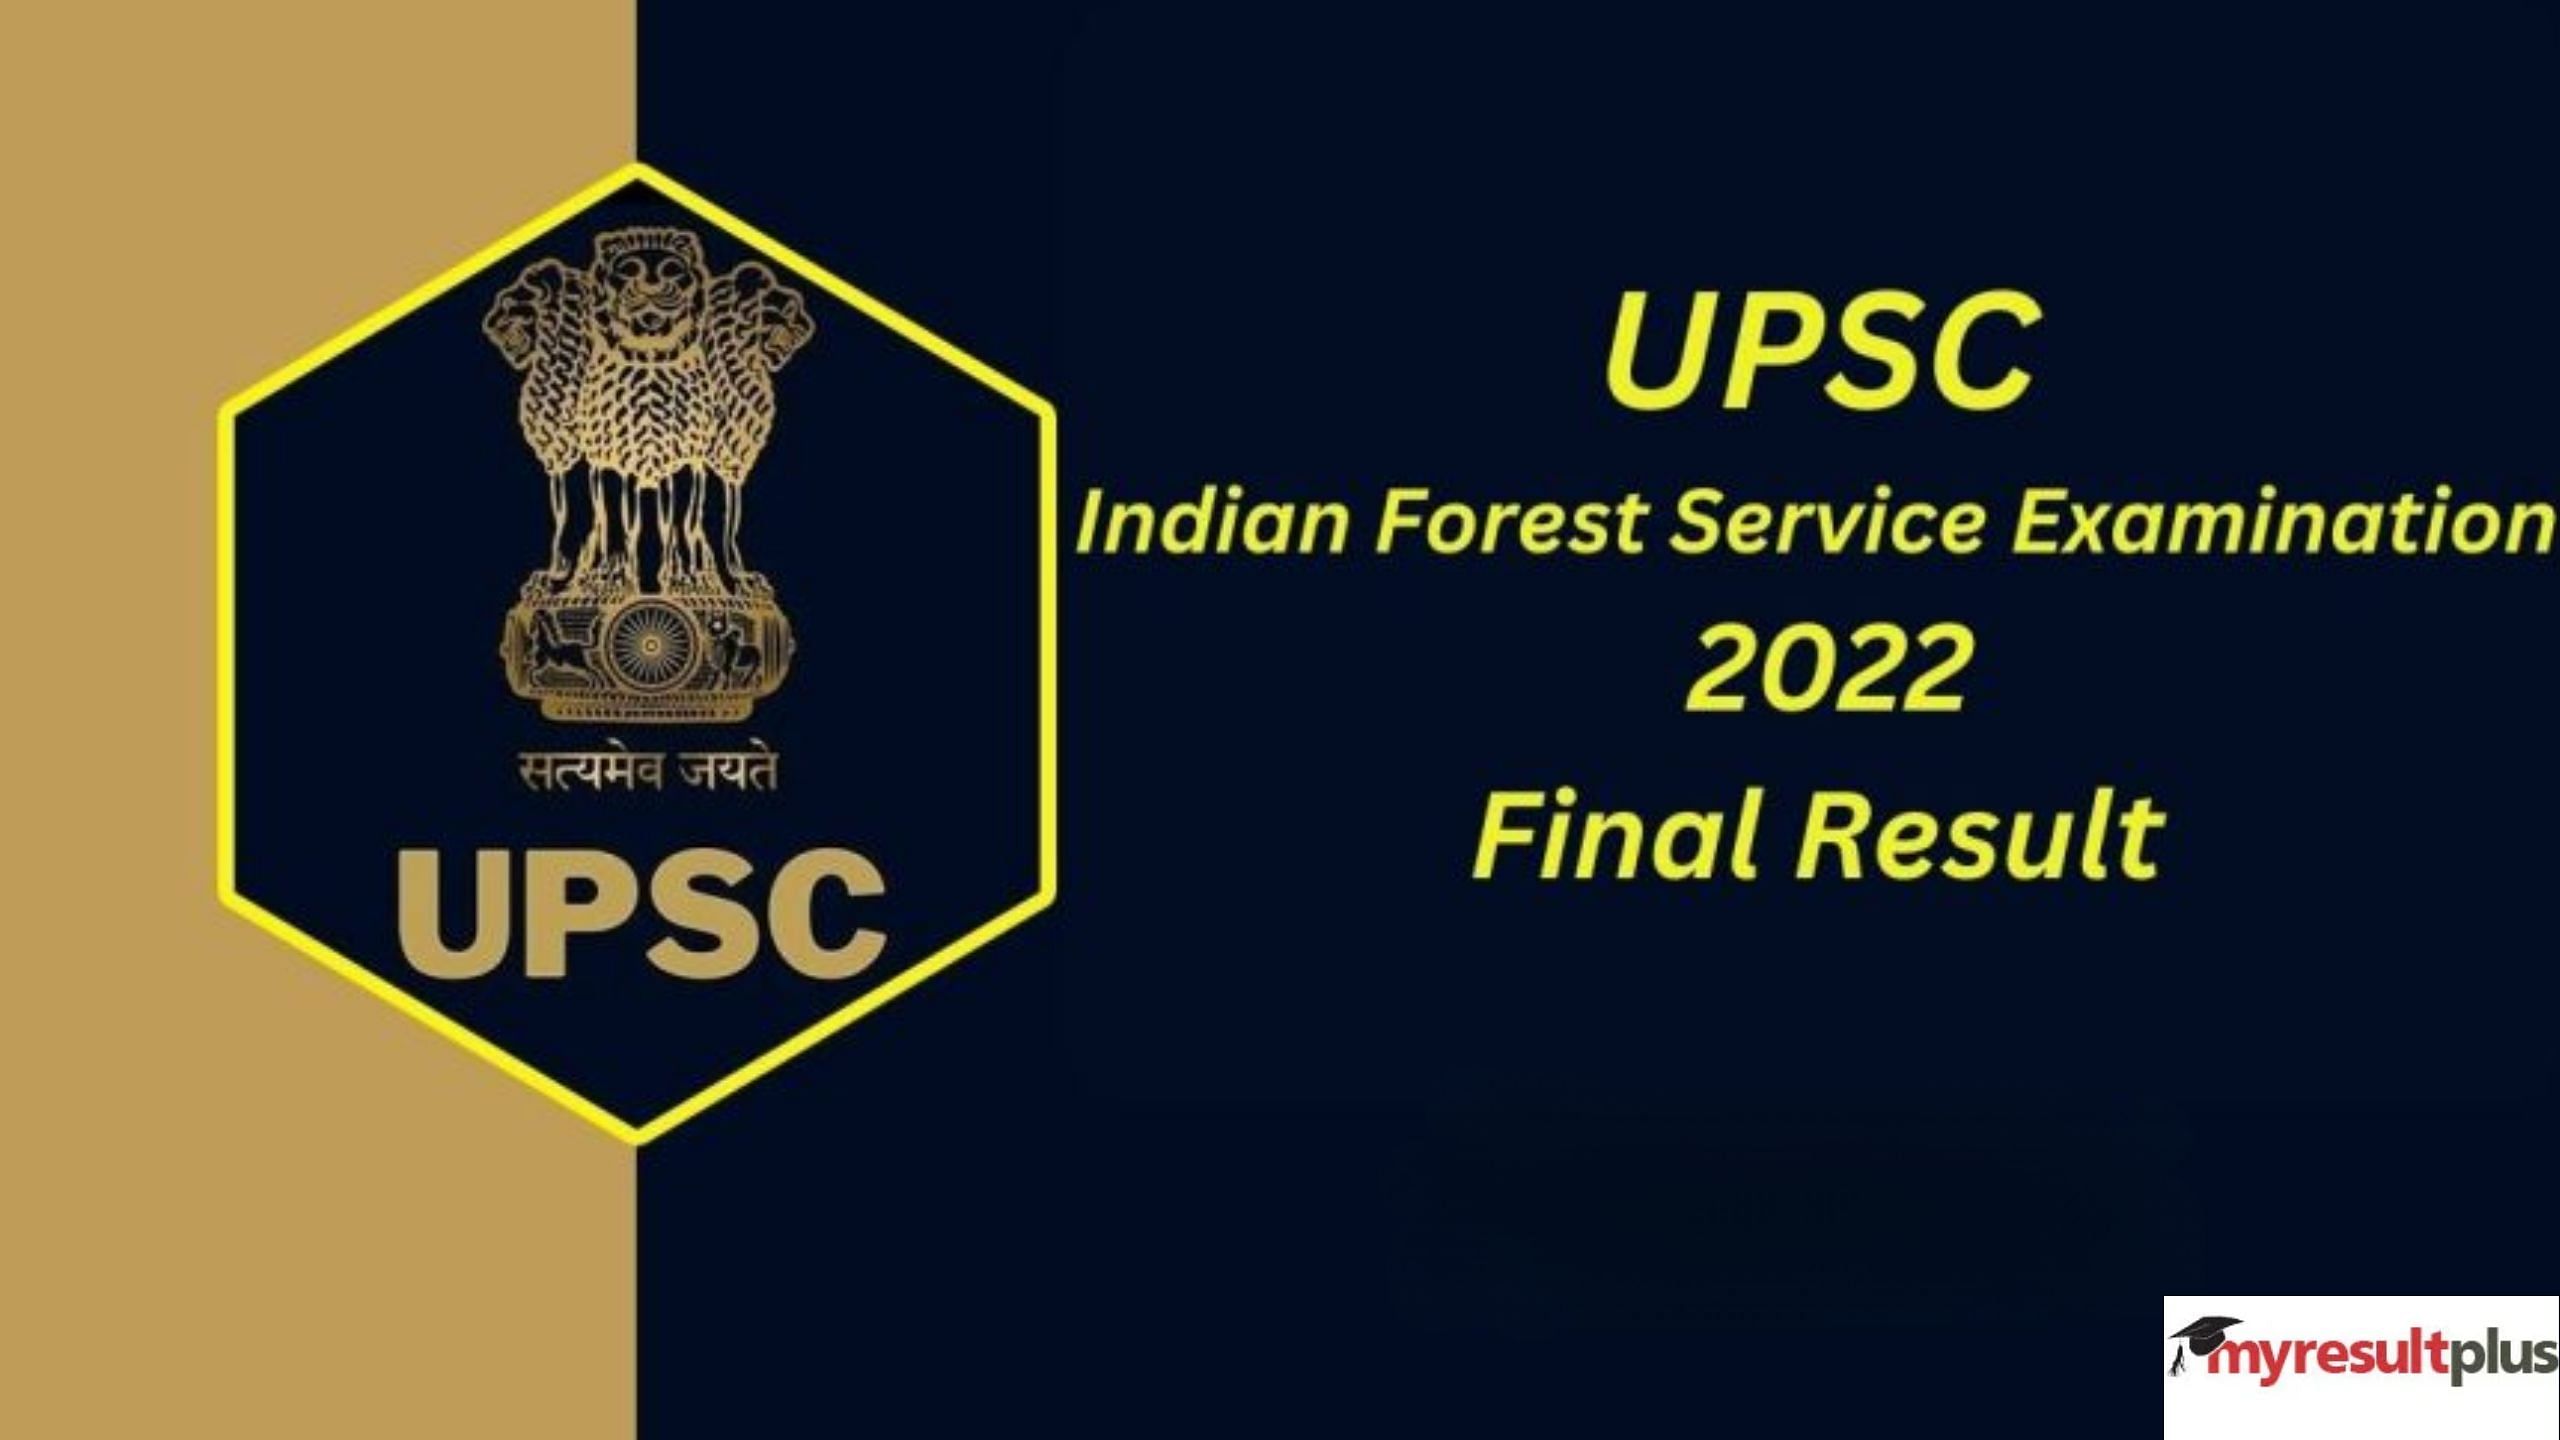 UPSC IFS 2022 Result Out: Indian Forest Service 2022 Final Result Released, How to Check